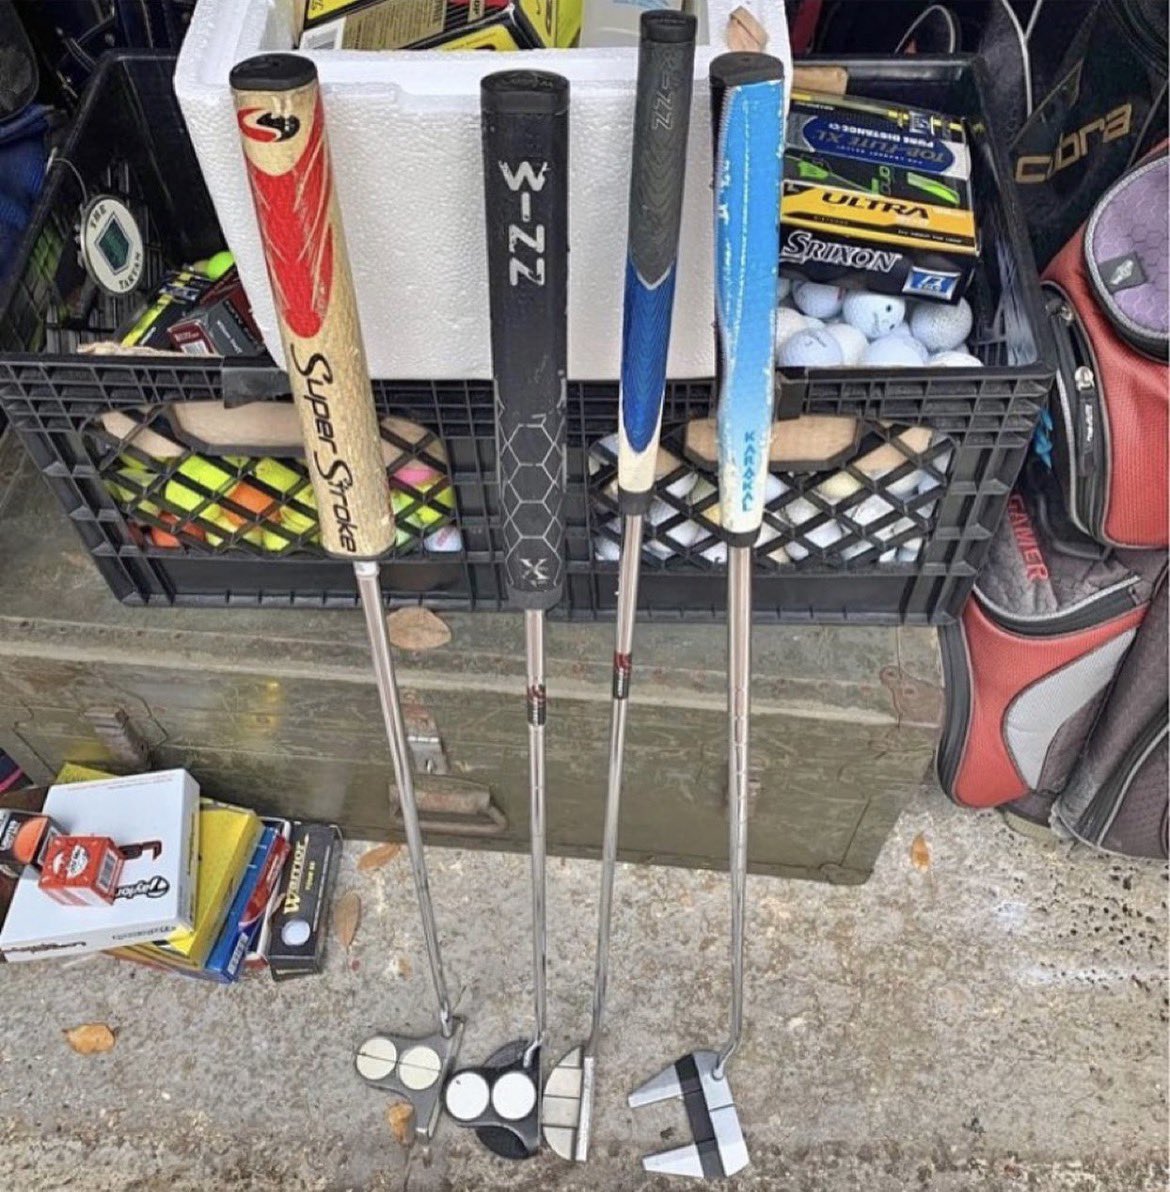 If you have 4 or more putters, you’re a head case